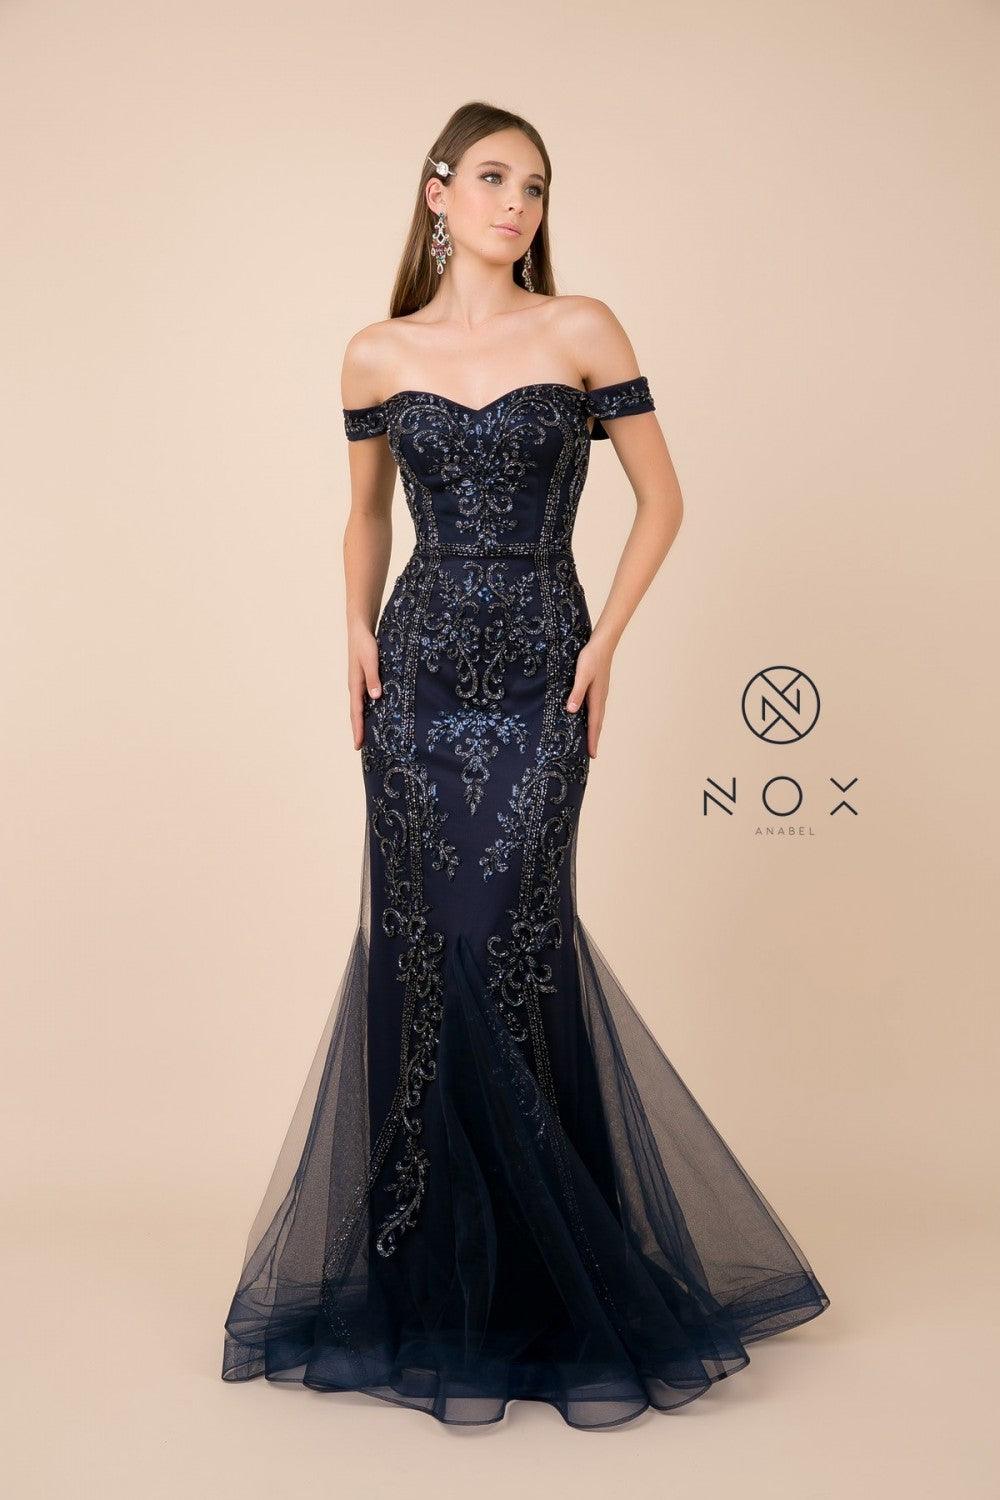 Prom Long Dress Off Shoulder Evening Gown - The Dress Outlet Nox Anabel